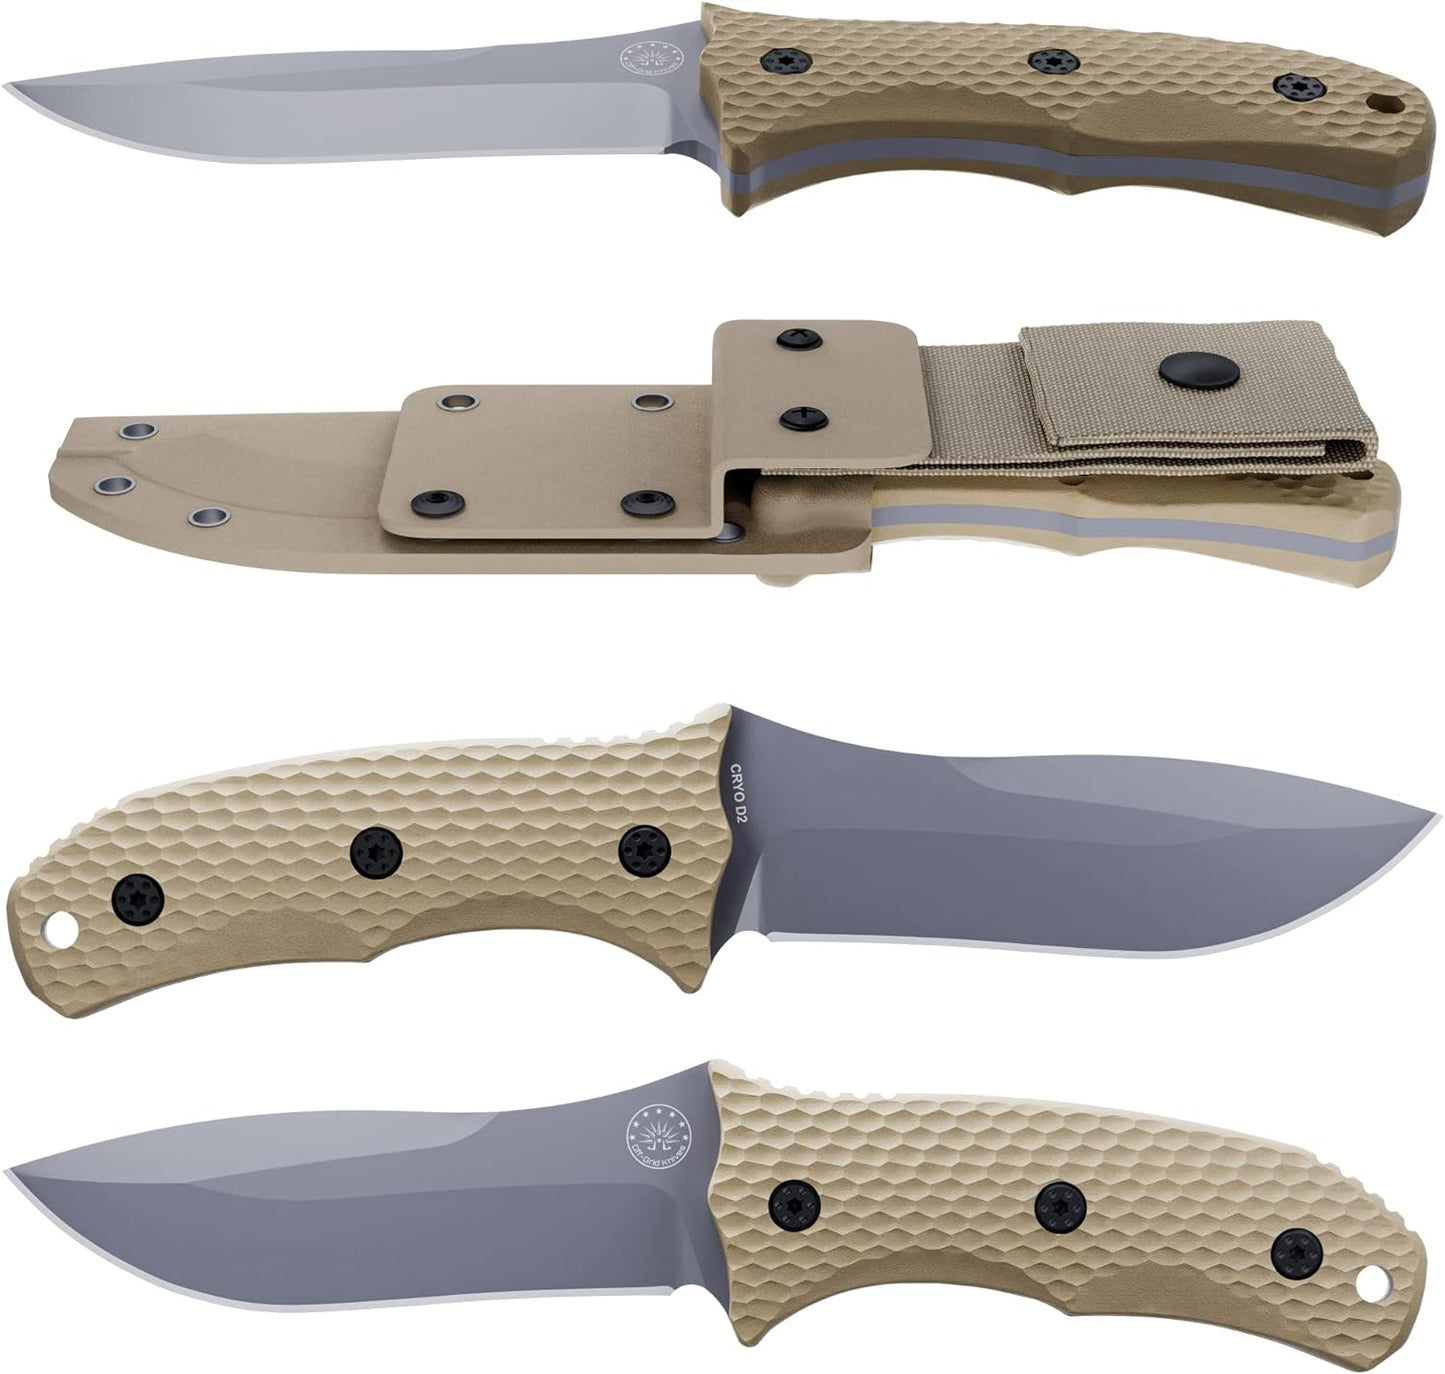 KD Hunting Knife with Kydex Sheath is suitable for Camping